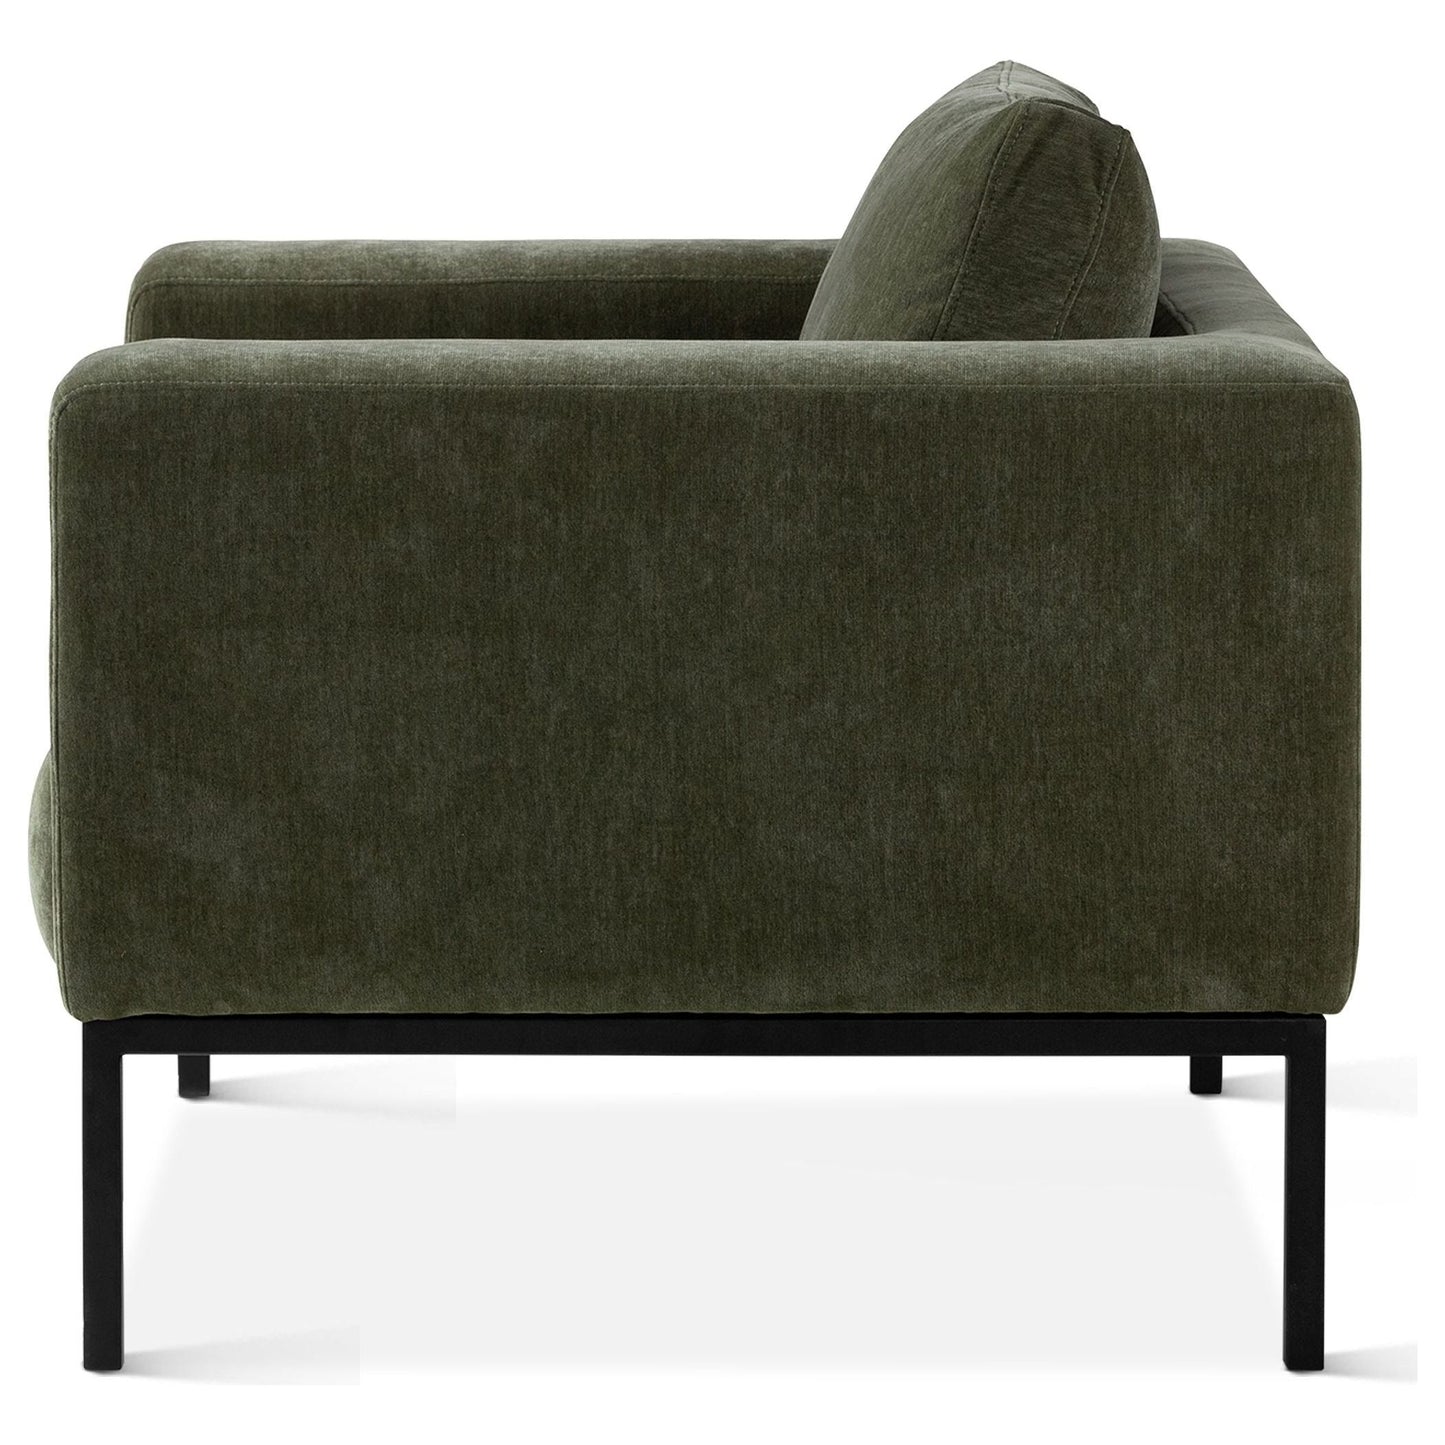 A modern Stewart accent chair in olive green chenille fabric with a smooth texture, featuring a robust, minimalistic design, a rounded backrest, and a single cylindrical side cushion. The chair stands on four sleek black metal legs, isolated on a white background.